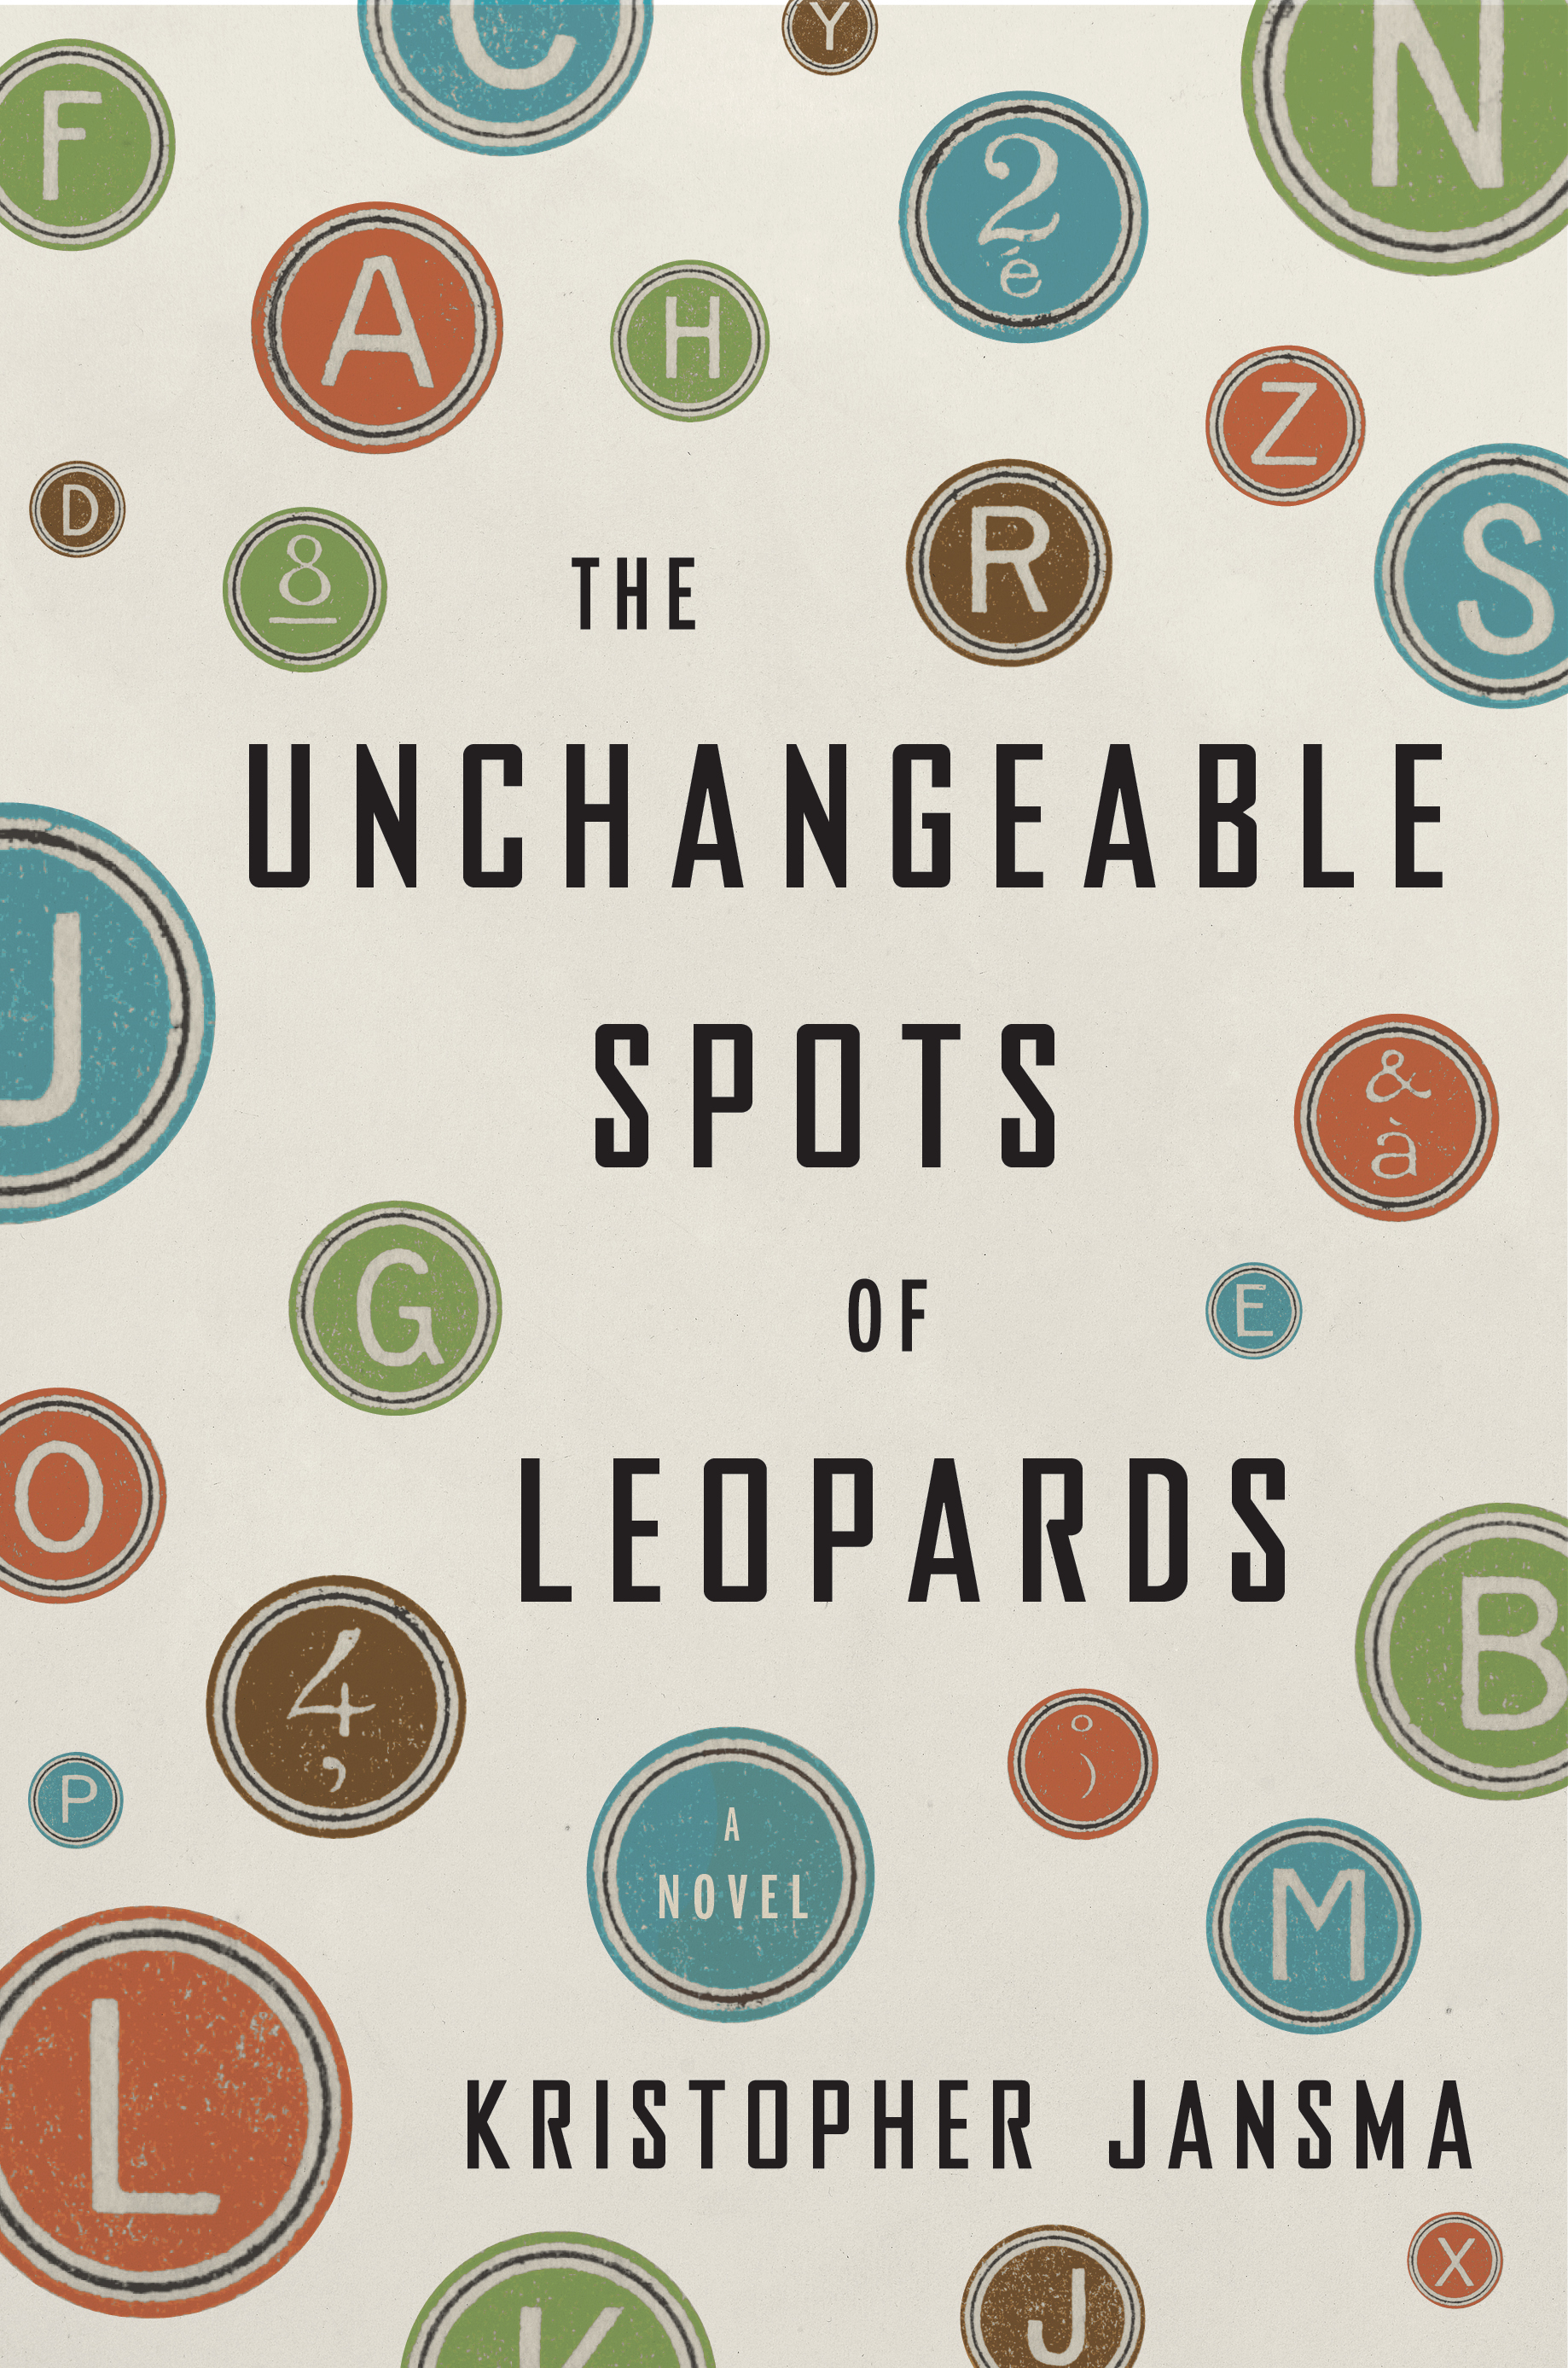 Book Launch: The Unchangeable Spots of Leopards by Kristopher Jansma